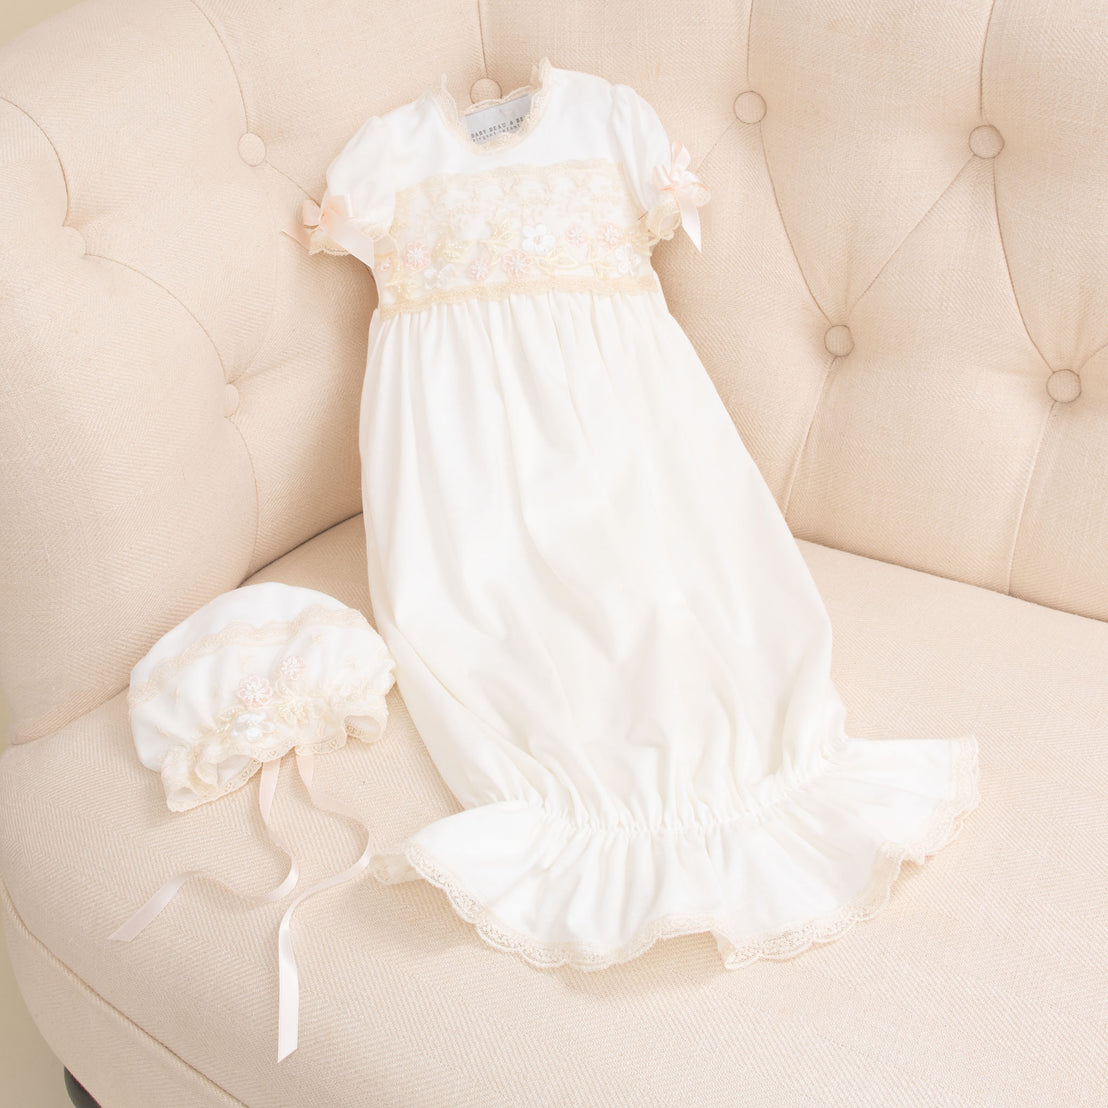 An elegant Jessica Newborn Gown with floral embroidery and lace details, accompanied by the matching Jessica Newborn Bonnet, laid out on a soft beige armchair.